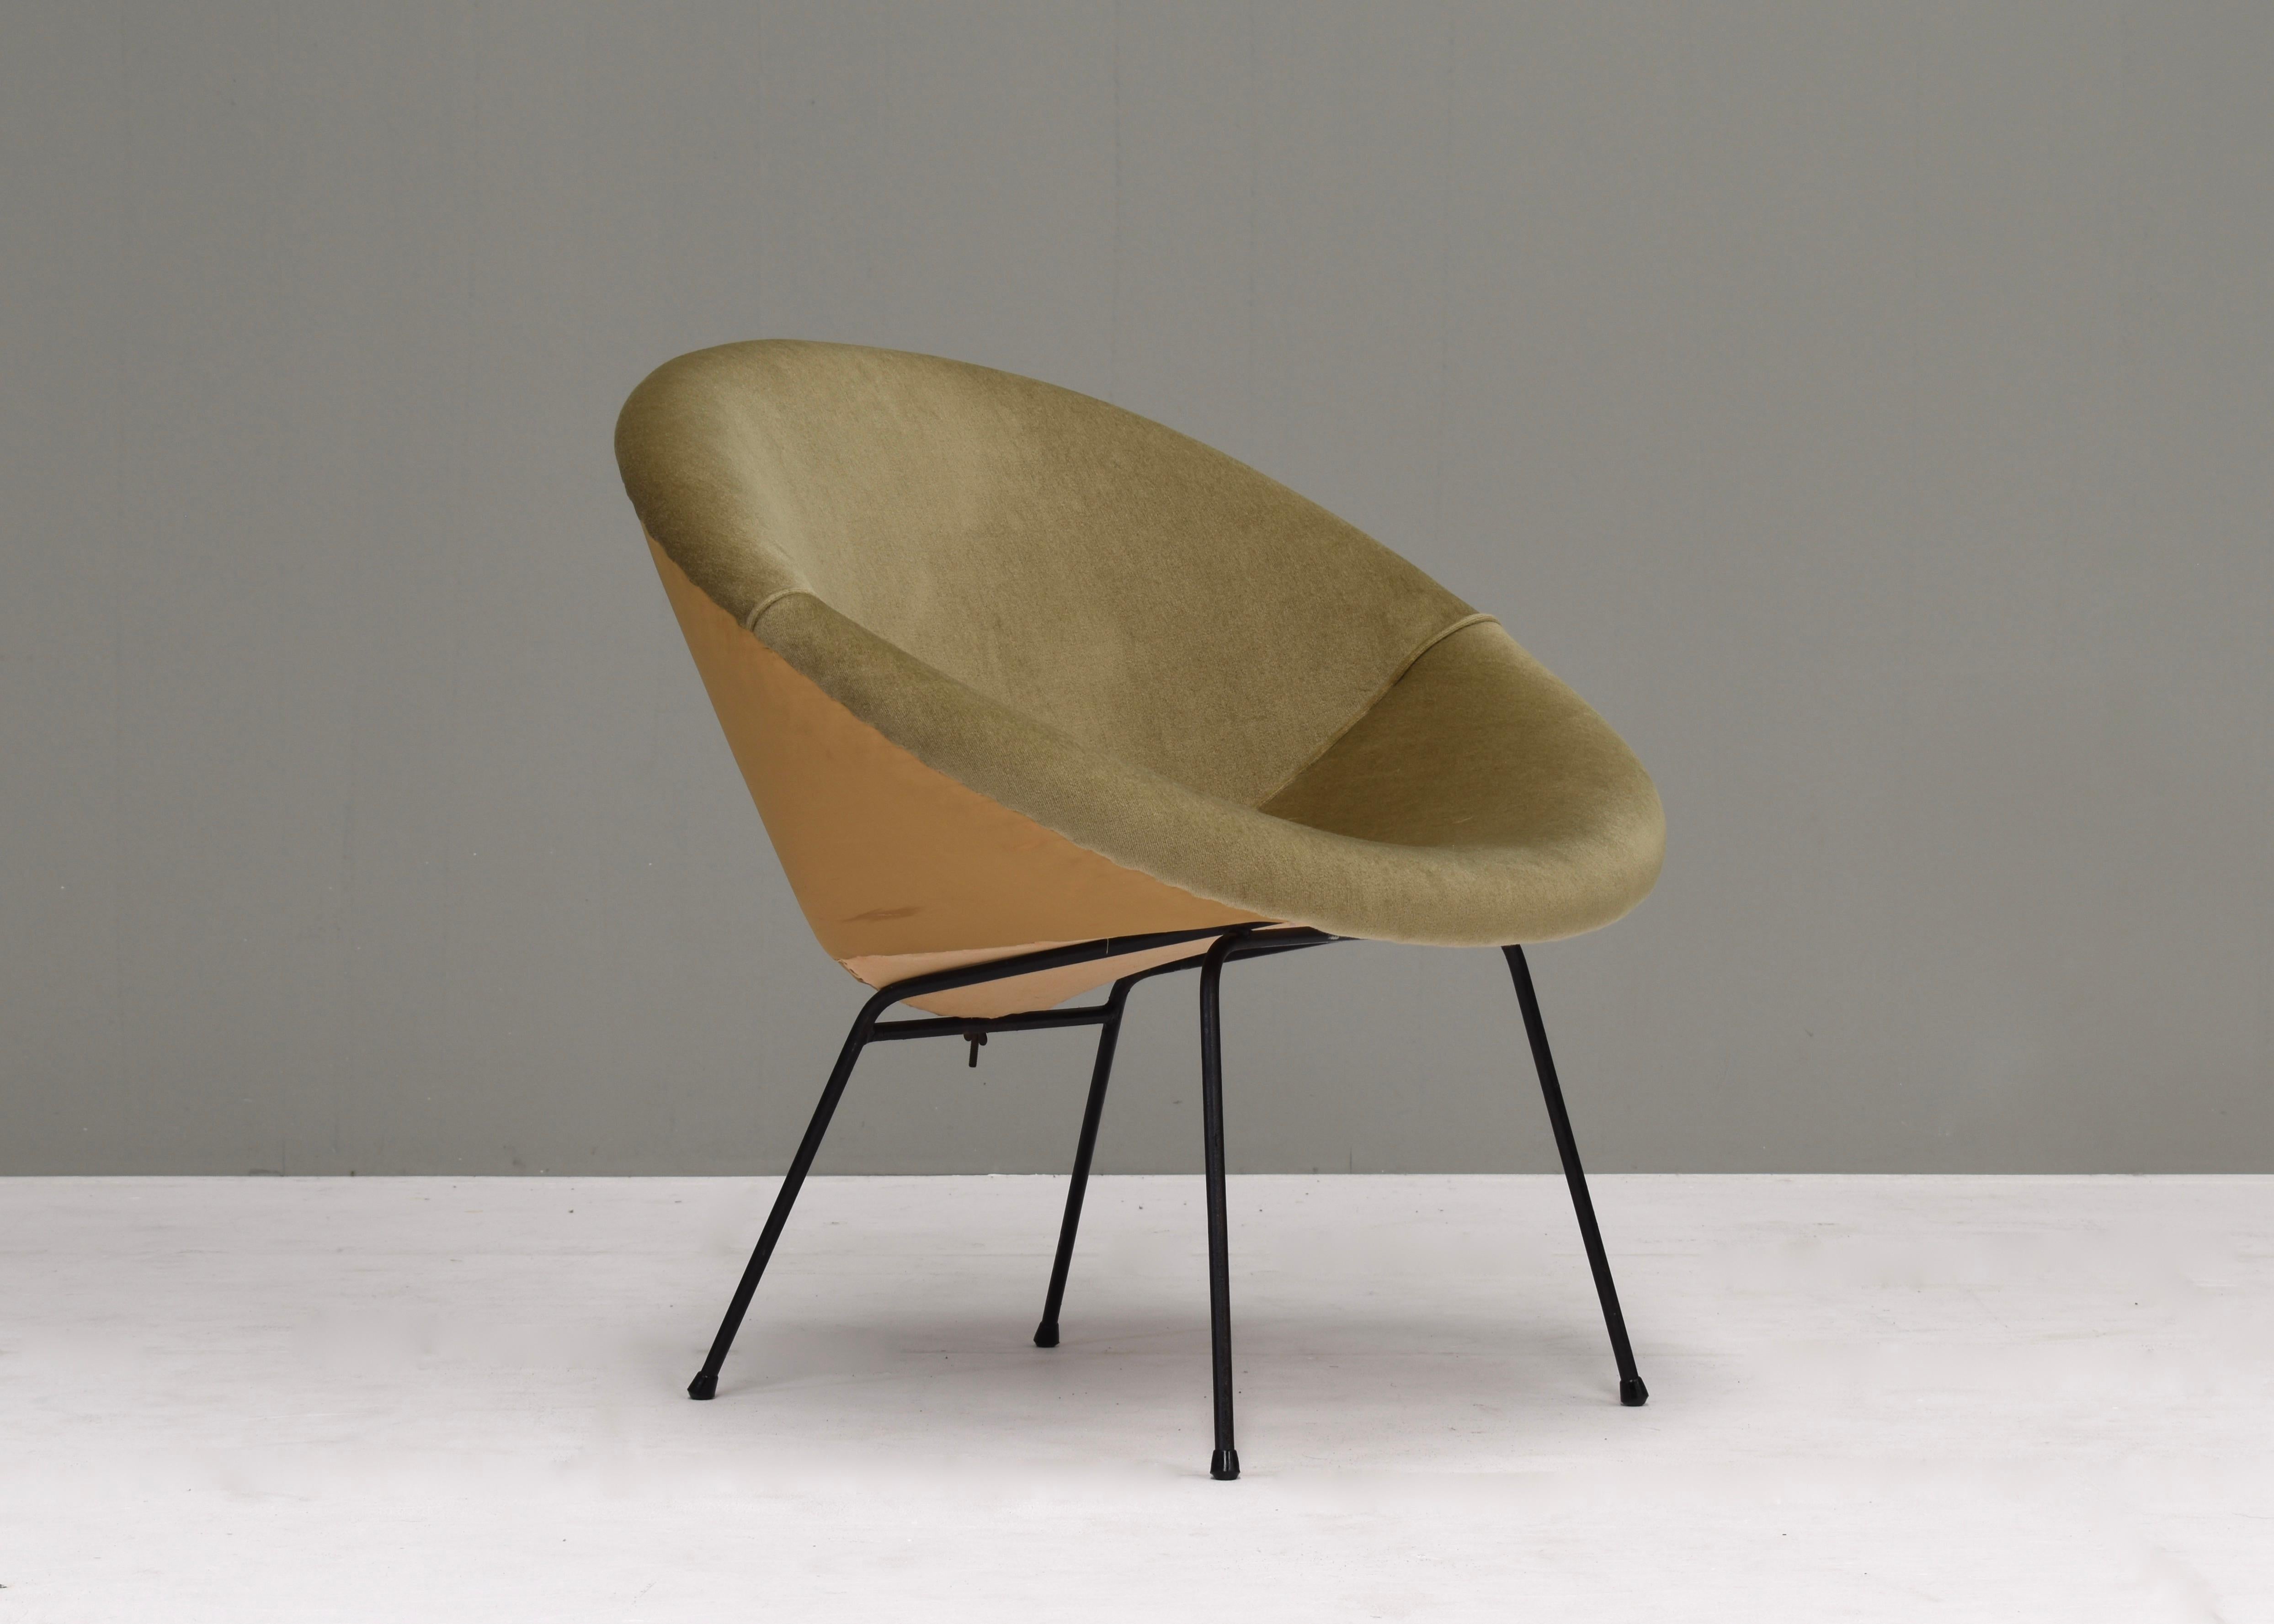 Sculptural Circle Chair in Original Mohair Velvet and Black Metal Base, 1950's For Sale 6